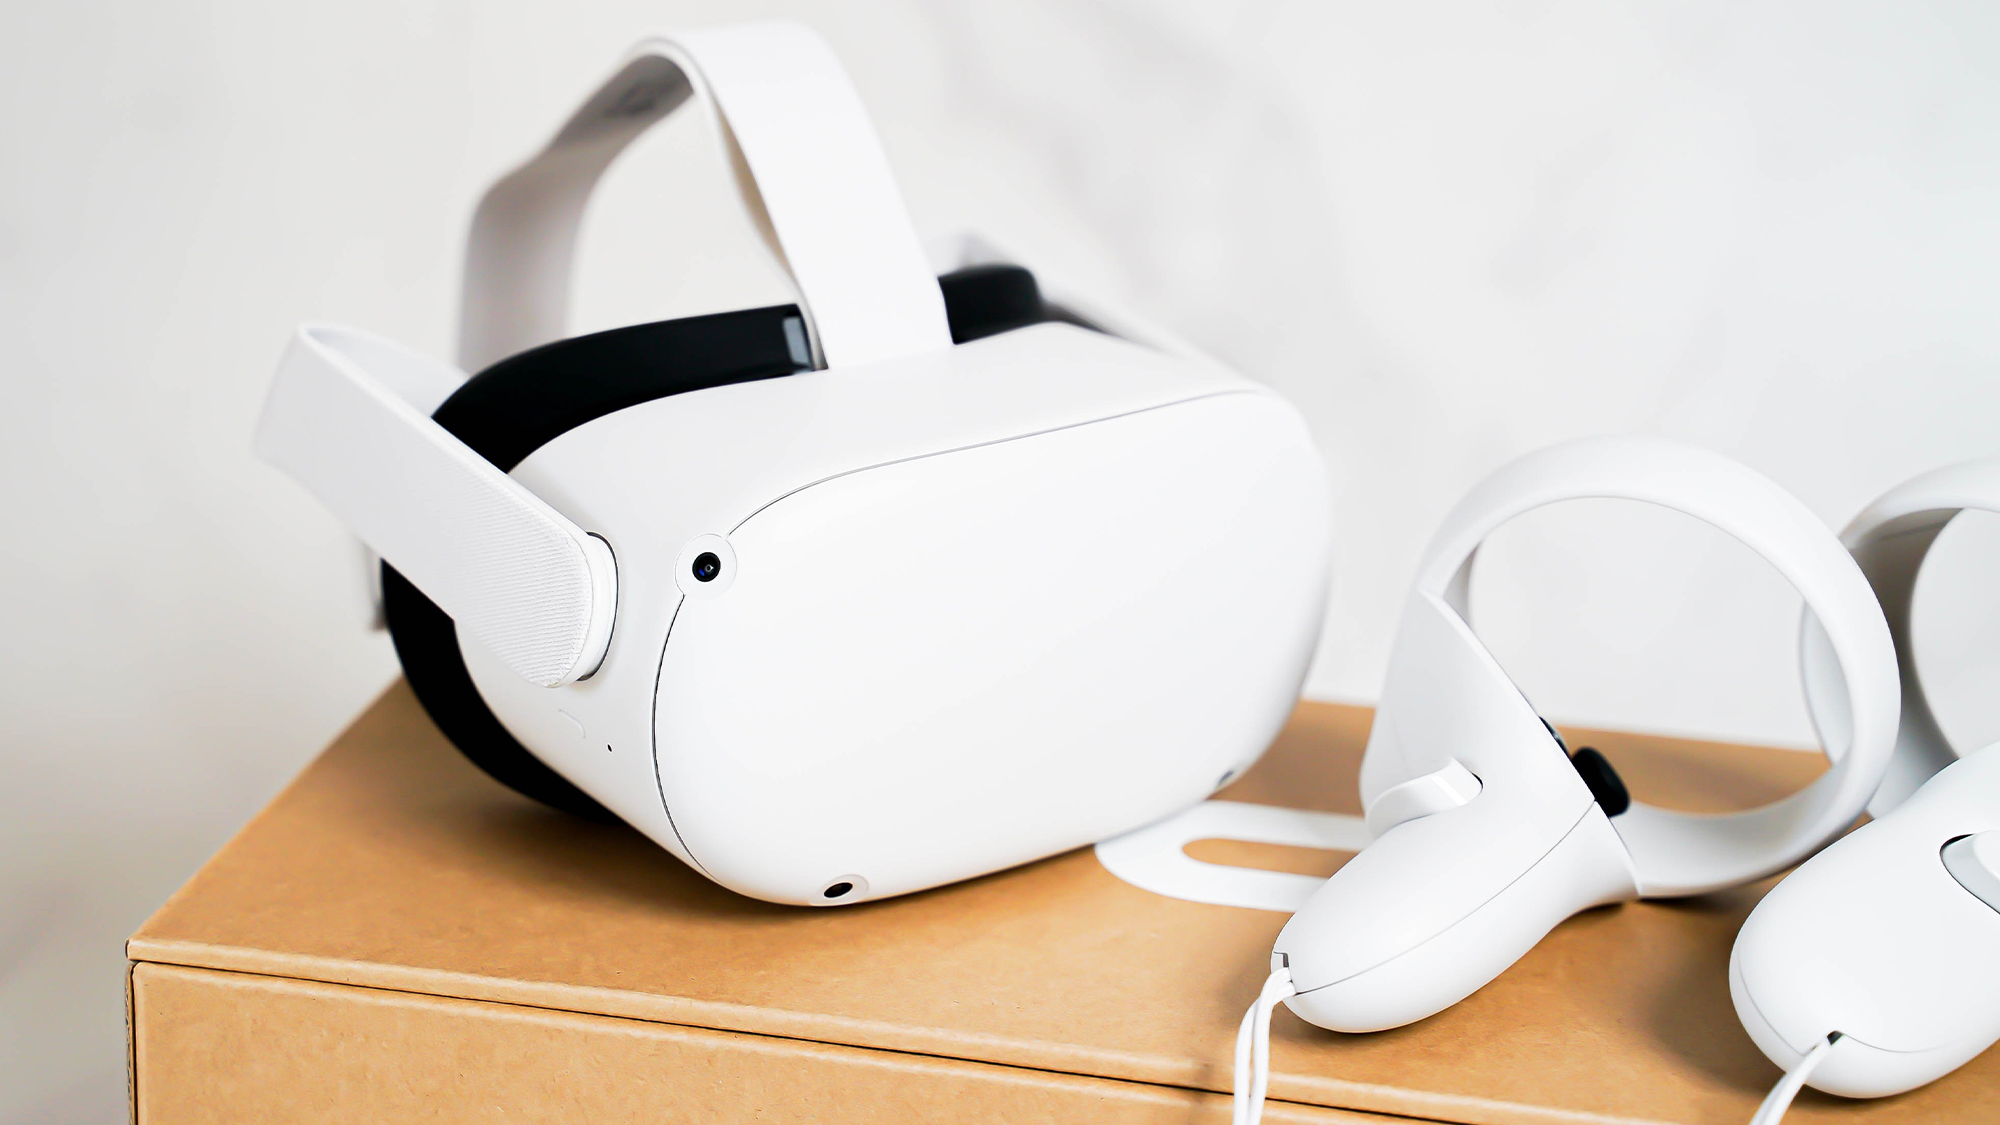 When selecting the right VR headset for you, the rule is, the higher the FPS, the better.